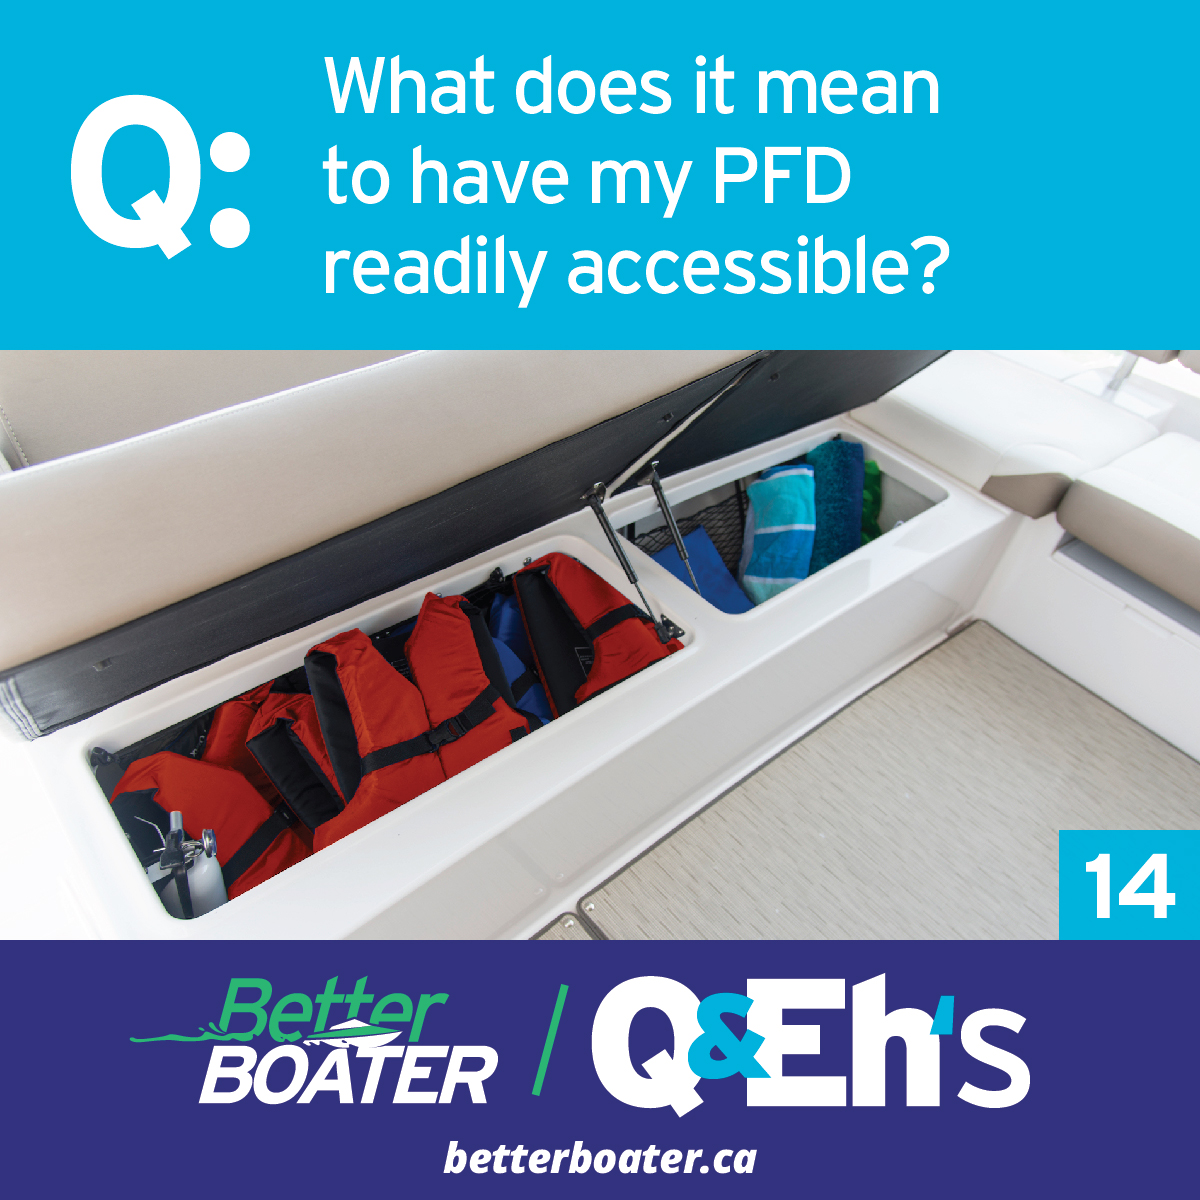 https://betterboater.ca/PFD%20Accessible